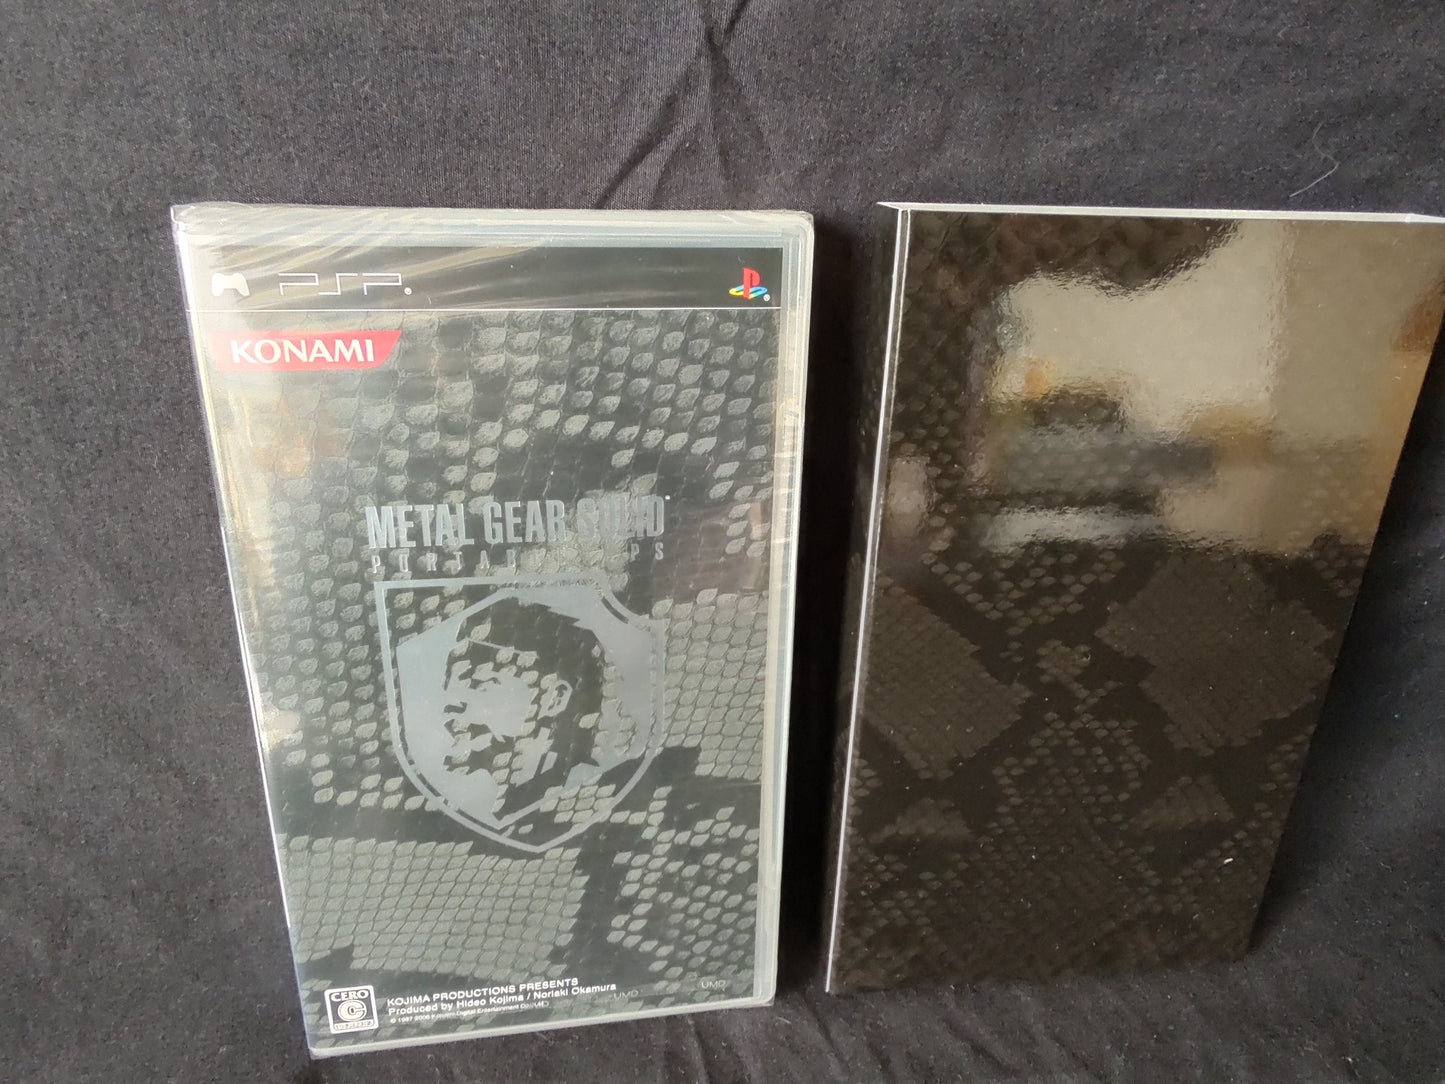 Uncomplete, METAL GEAR SOLID Collection Sony Playstation 2 PS2 20th Anniversary